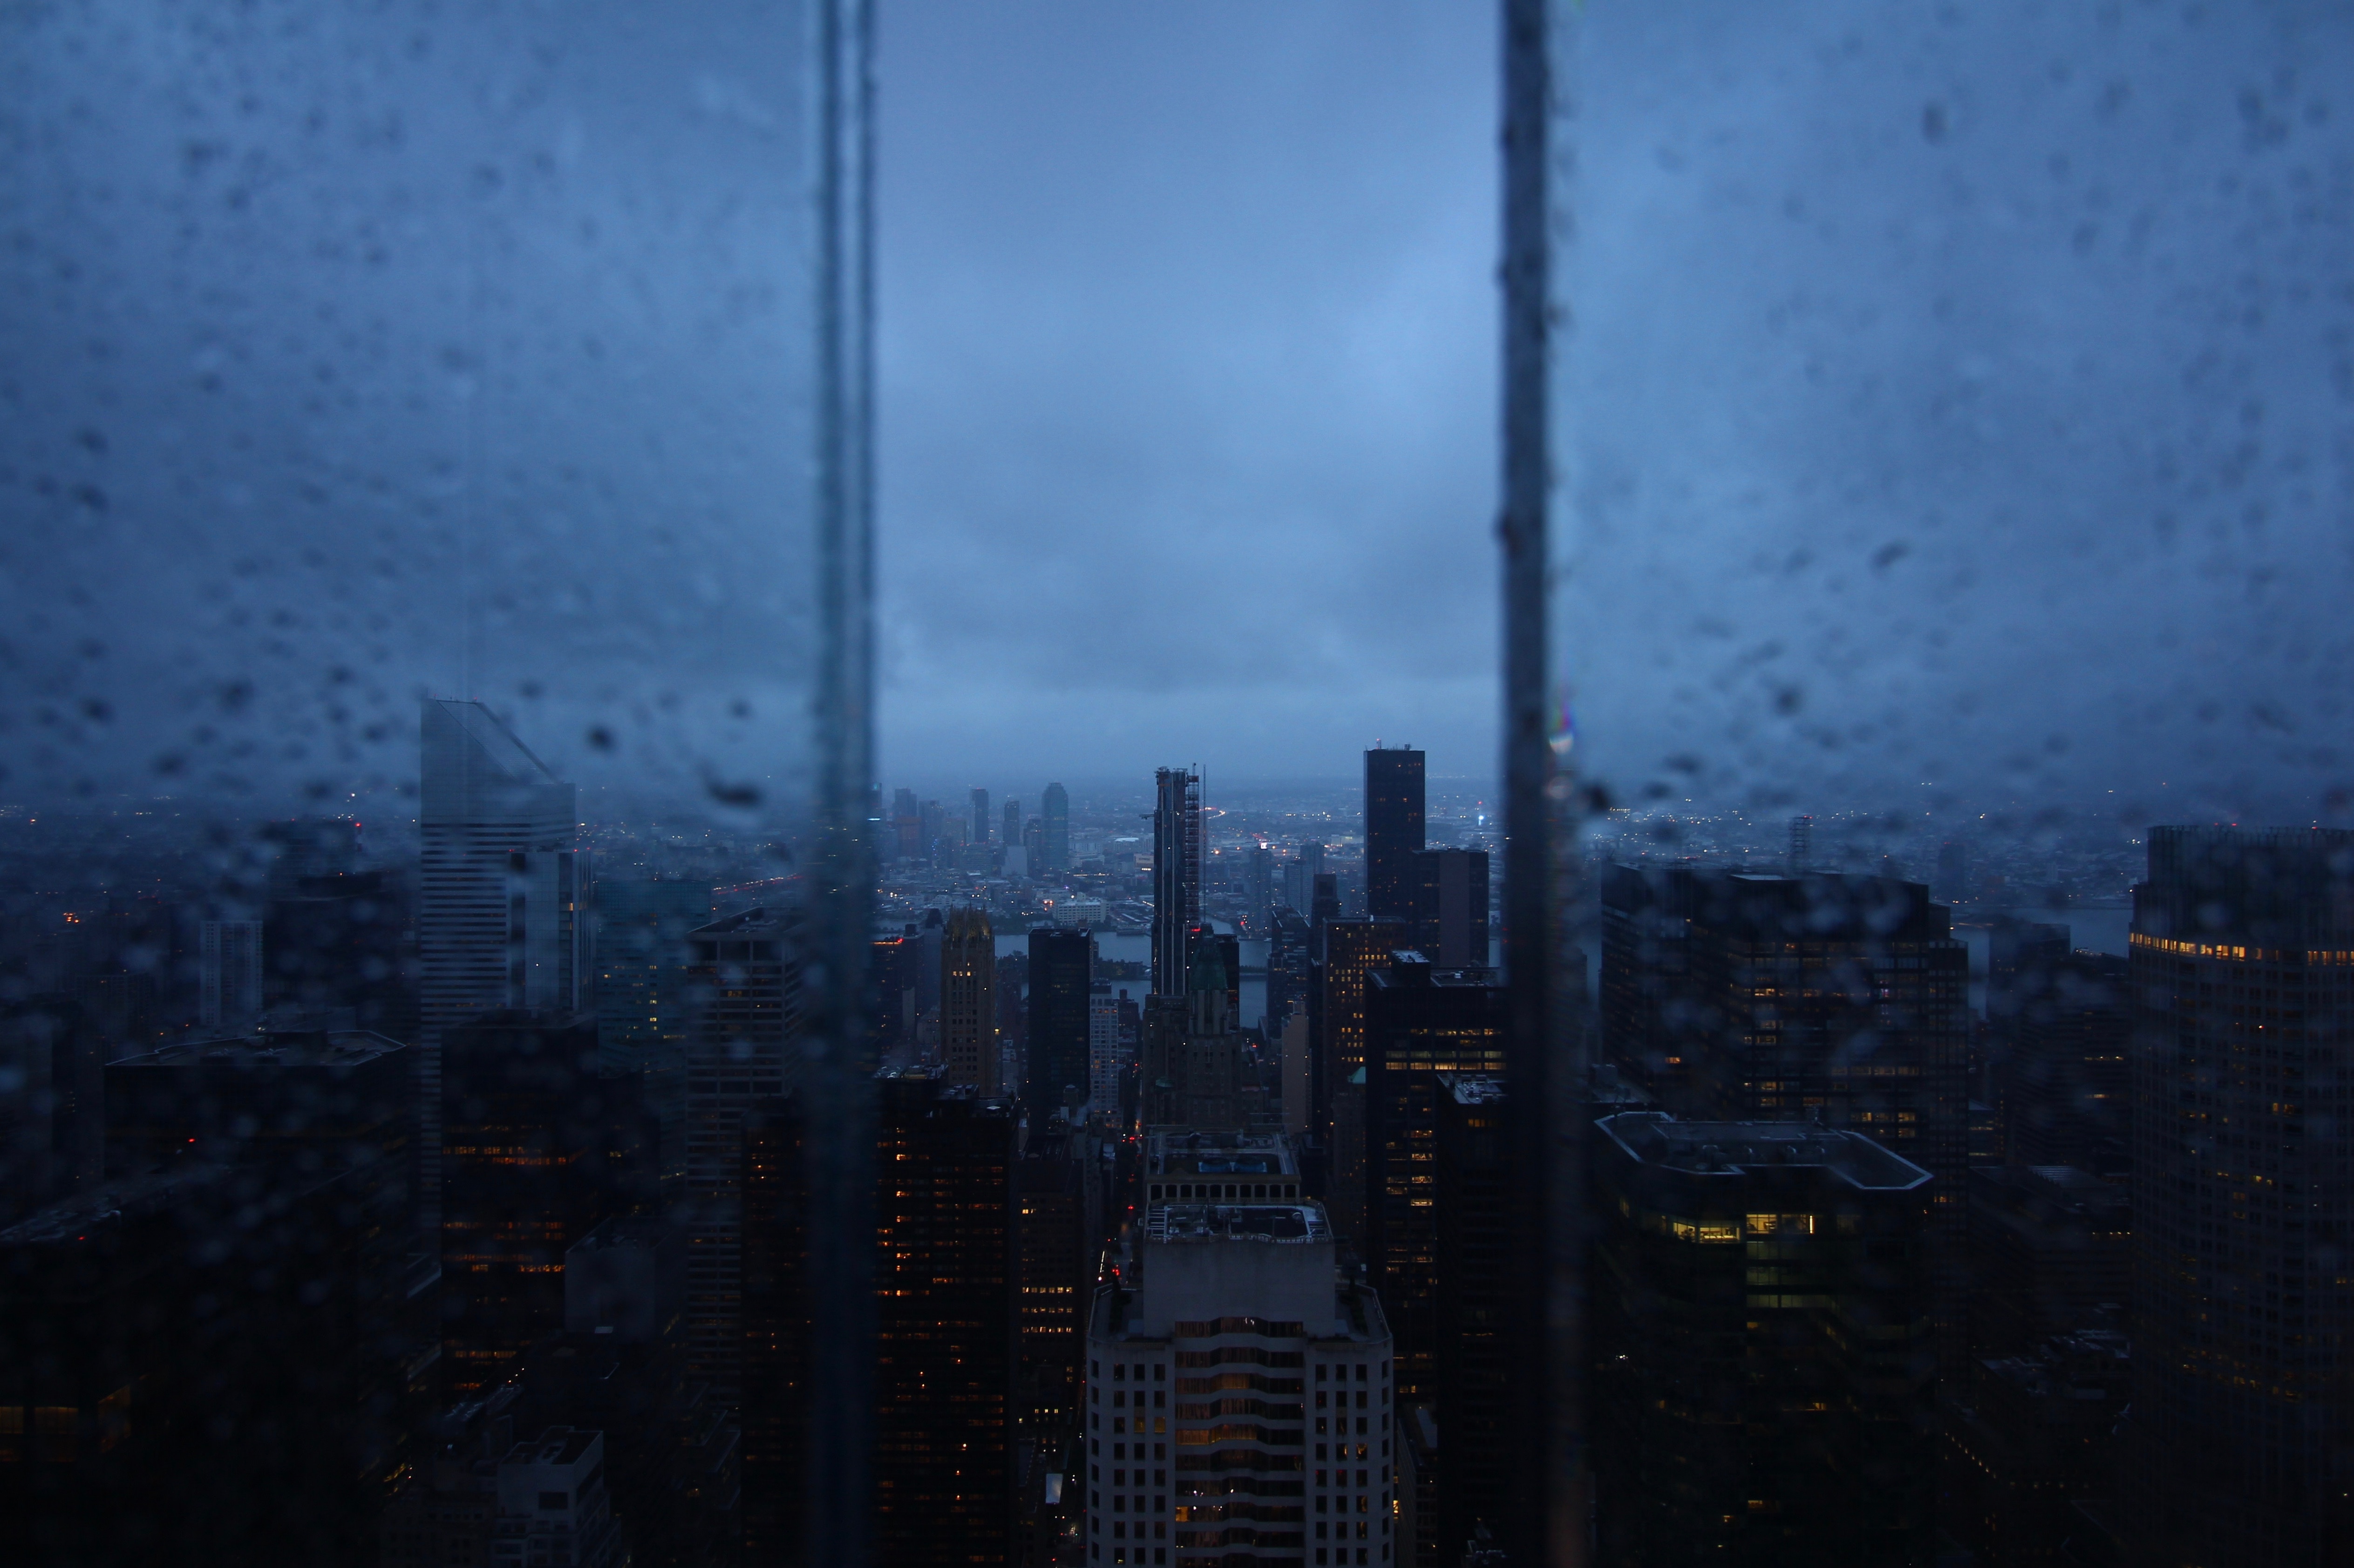 android rain, night city, skyscrapers, view from above, window, cities